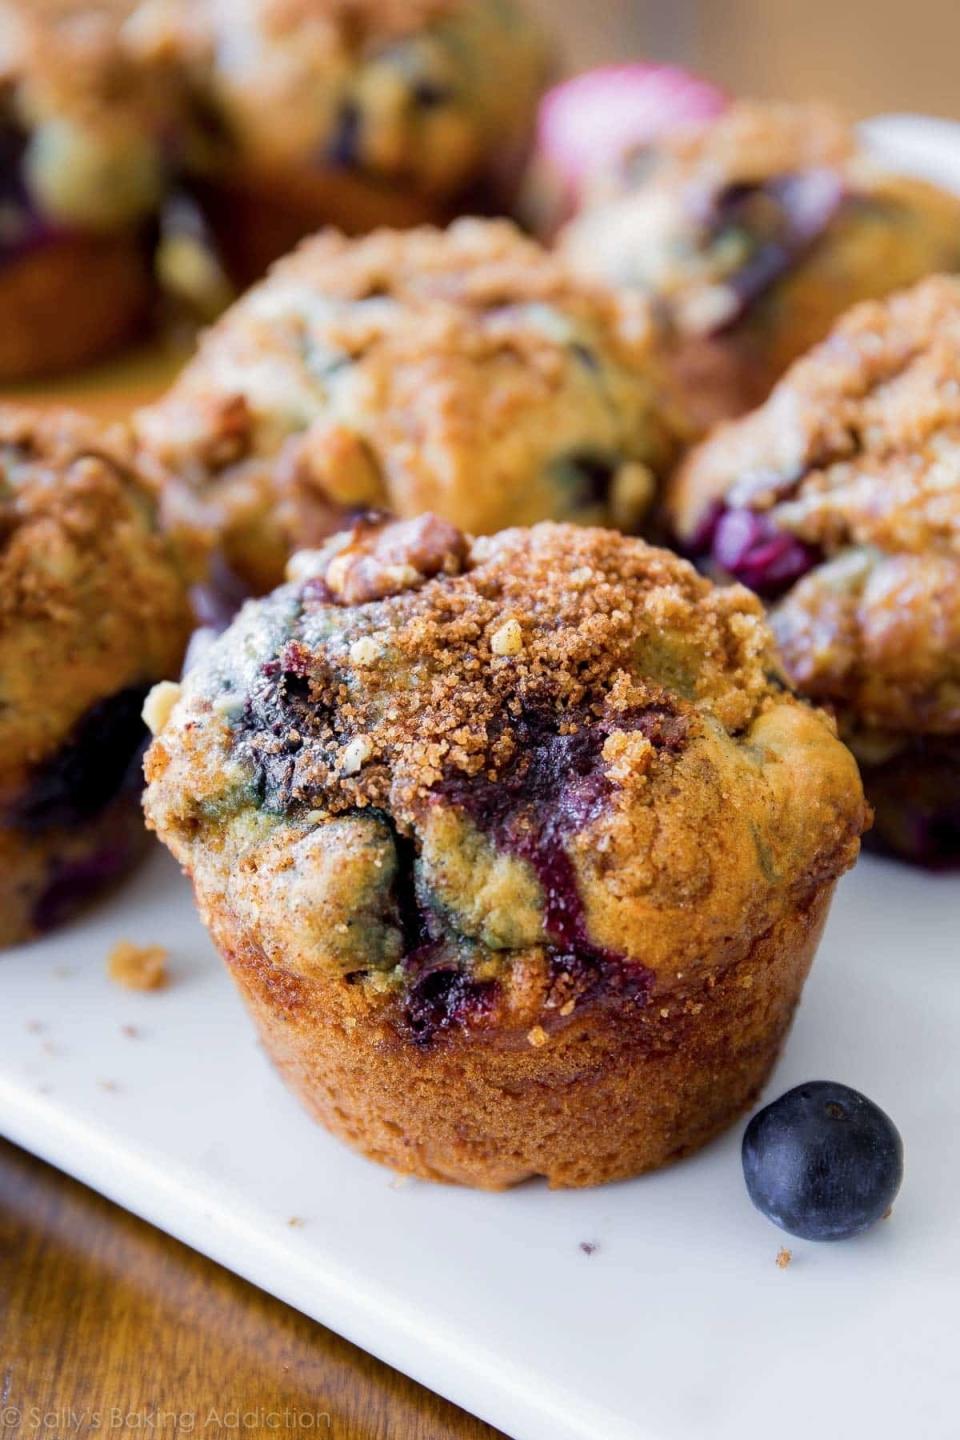 Freshly baked blueberry muffins with streusel topping on a white plate with a single berry